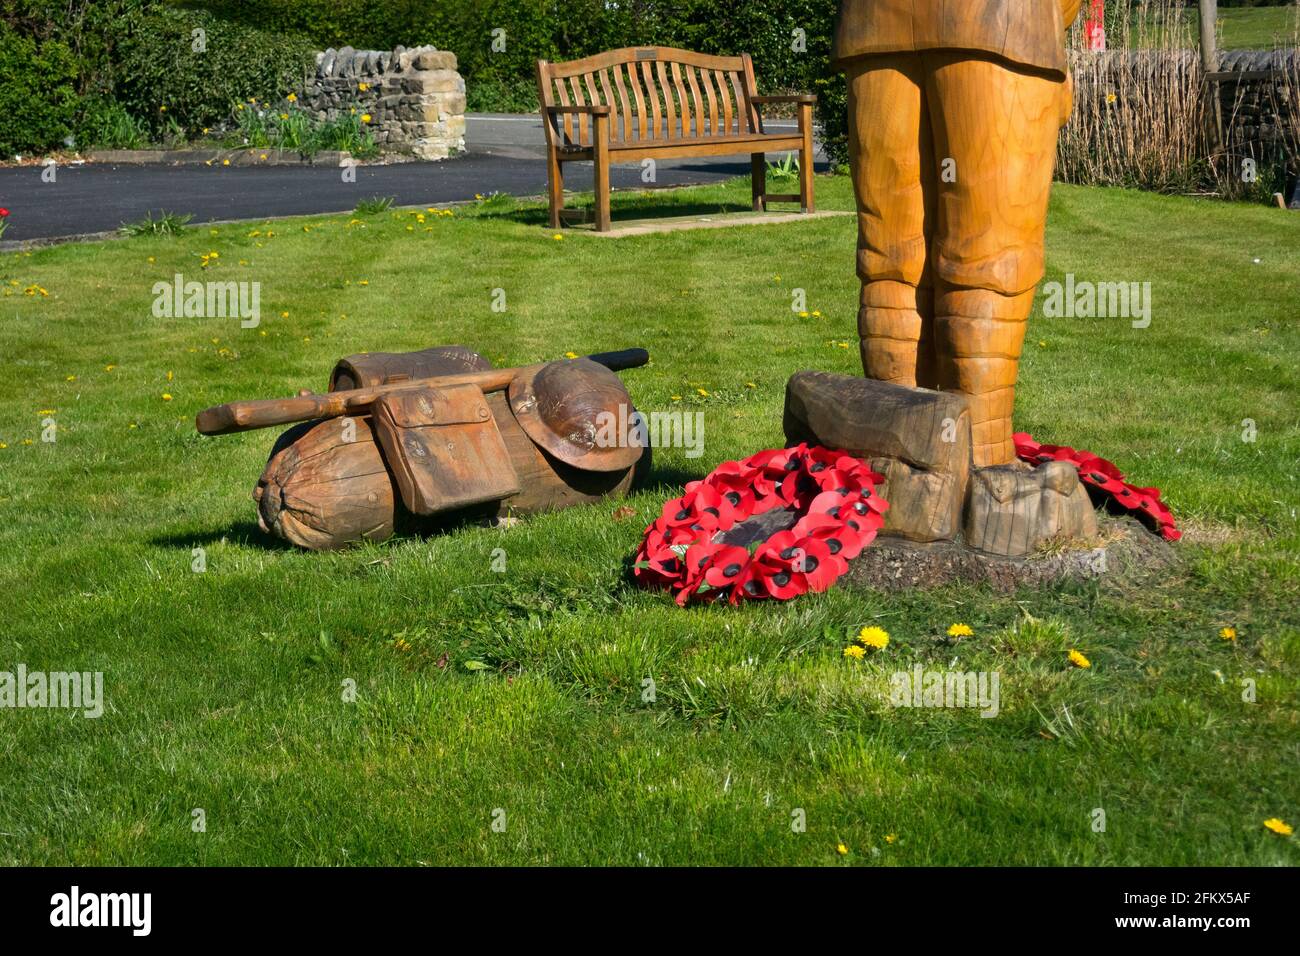 First World War Soldier and kit, carved from in-situ tree stump, to mark centenary of end of First World War, Ashford-in-the-Water, Derbyshire Stock Photo